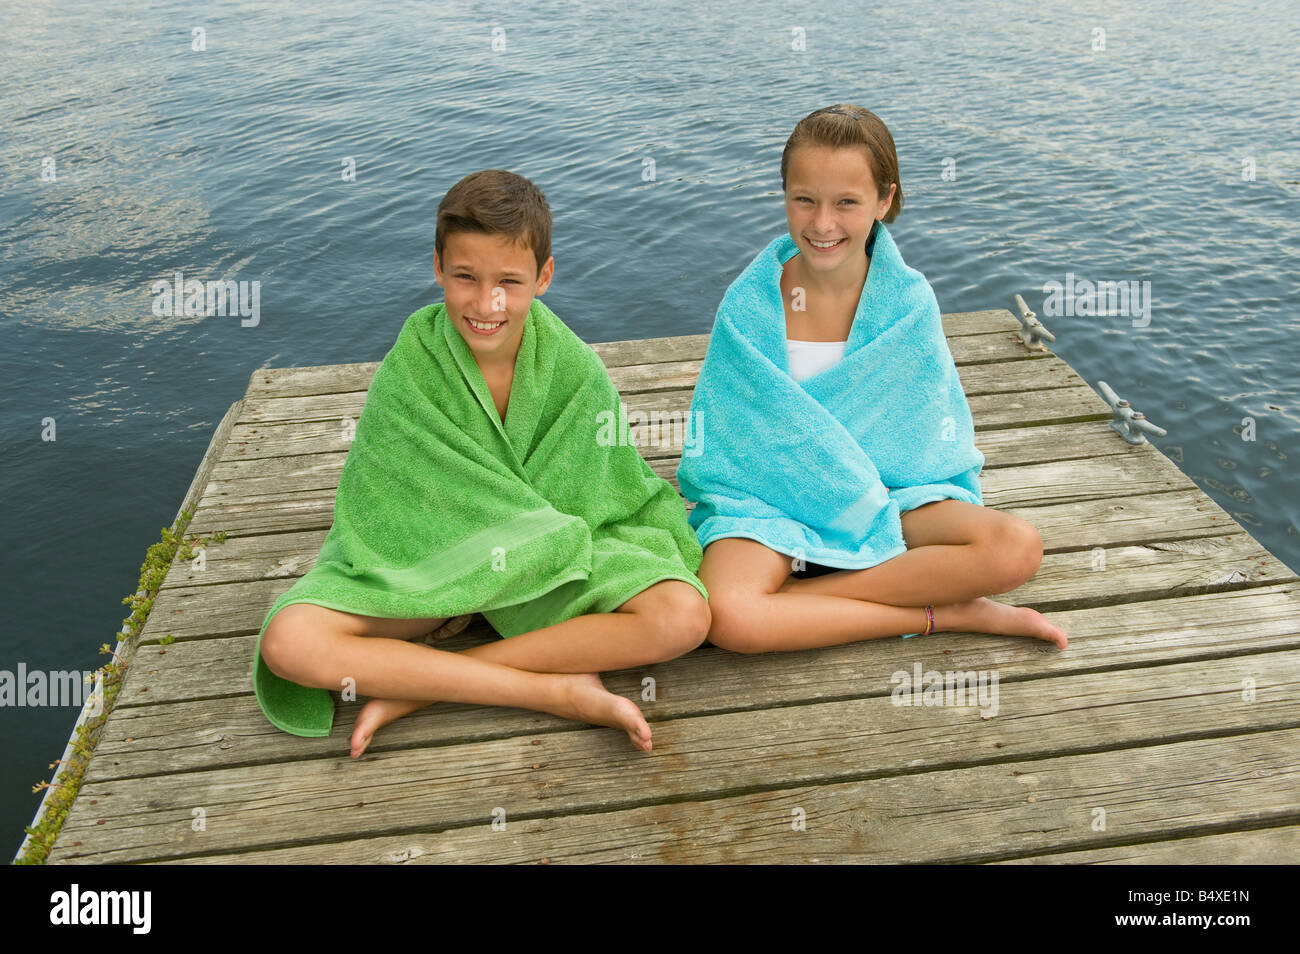 Children wrapped in towels on dock Stock Photo